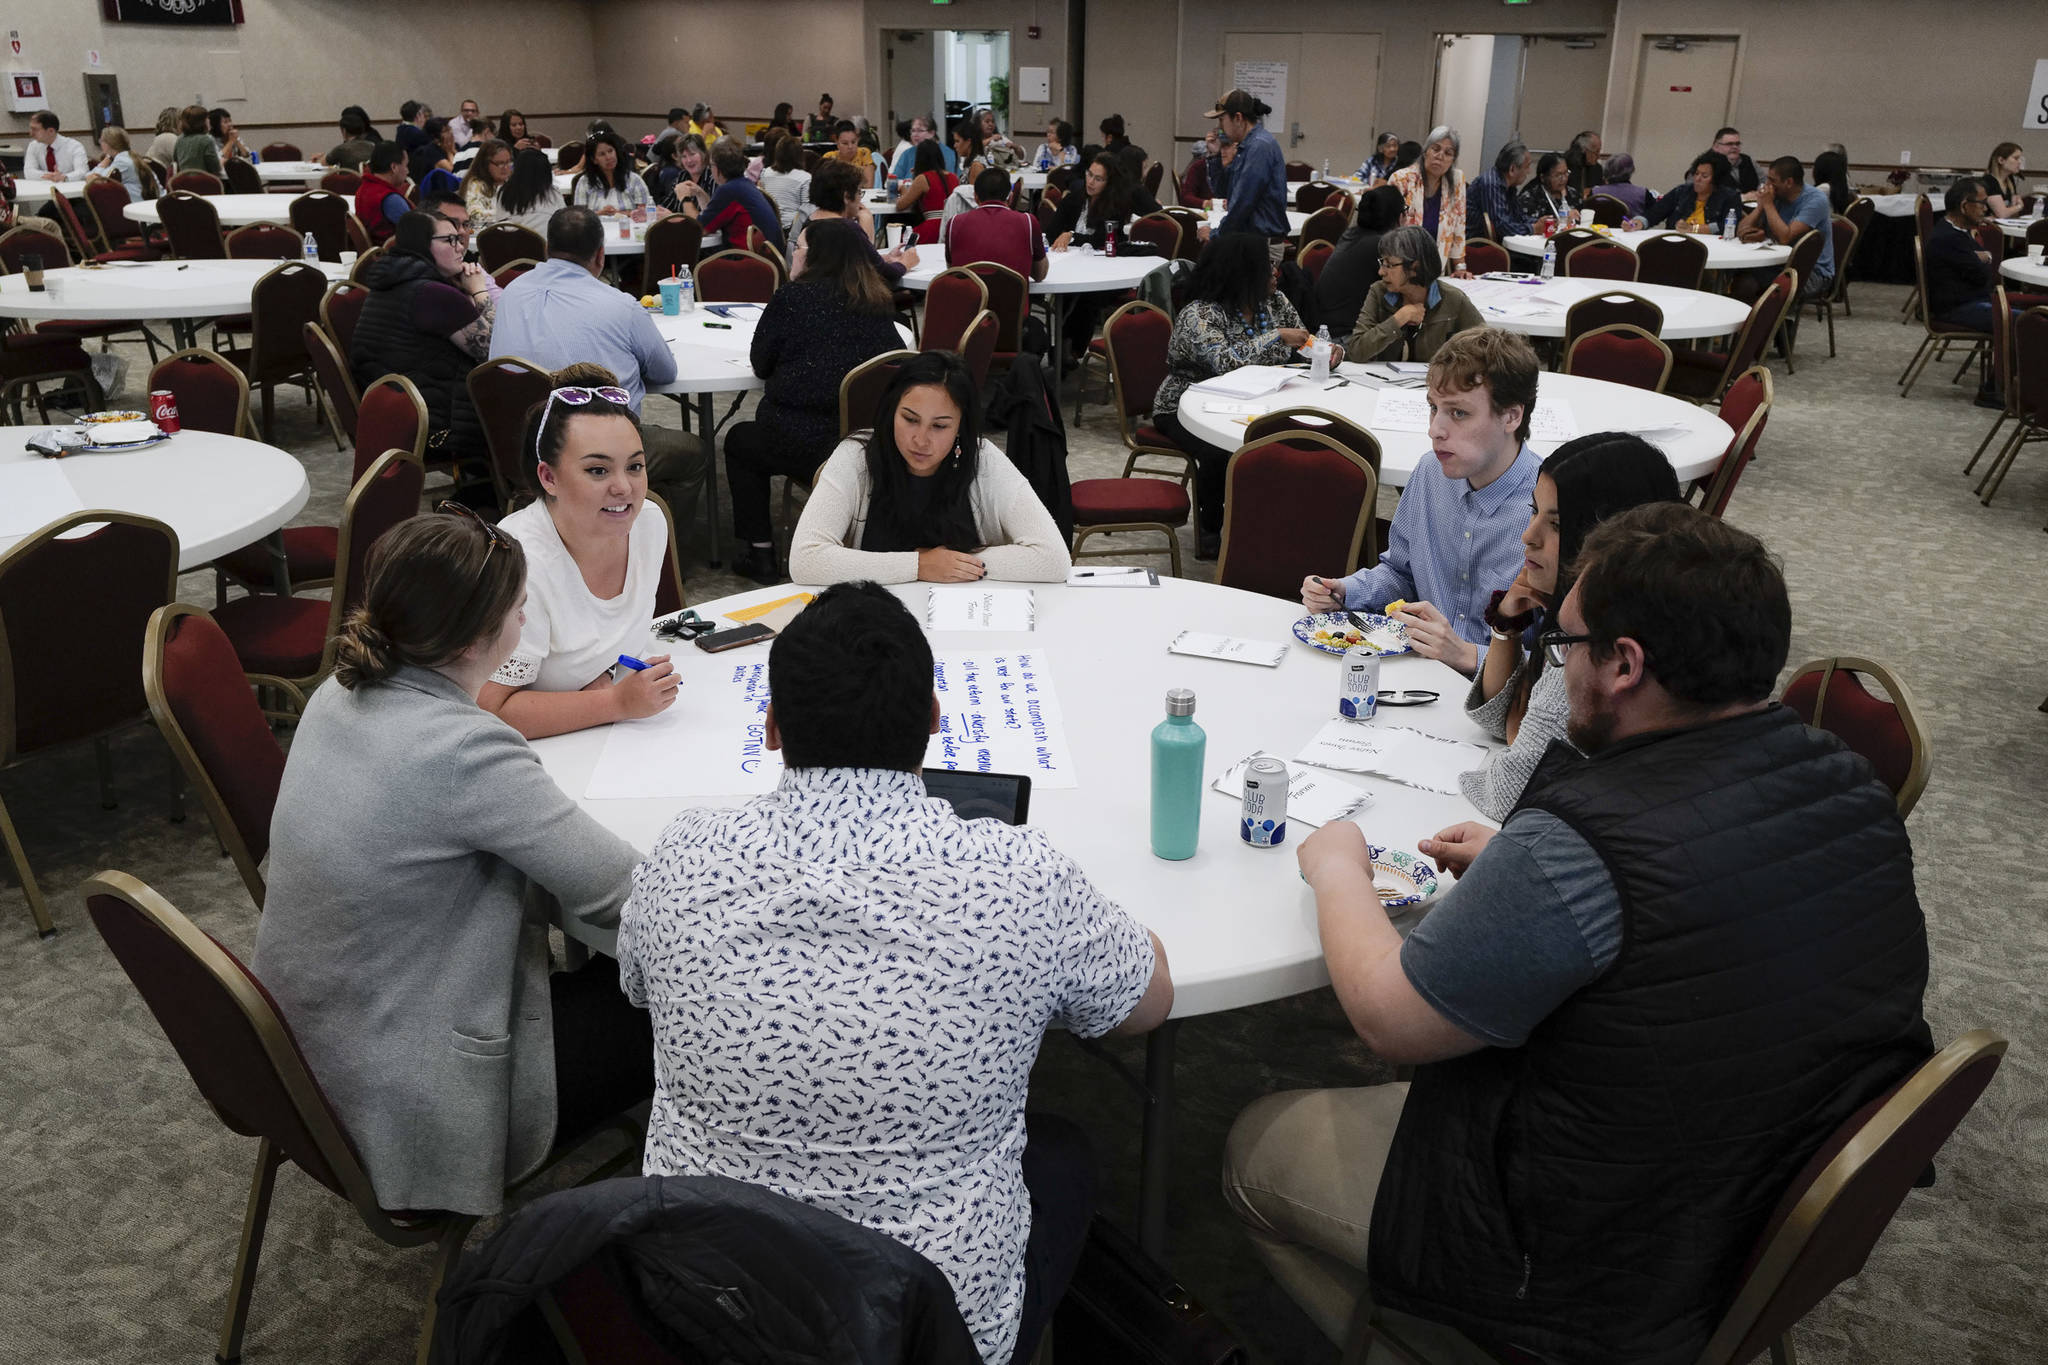 Participants work at tables to list ideas for a better Alaska during a Special Native Issues Forum at Elizabeth Peratrovich Hall on Tuesday, July 30, 2019. The forum was sponsored by Tlingit Haida, First Alaskans Institute, Native Peoples Action and Sealaska. (Michael Penn | Juneau Empire)